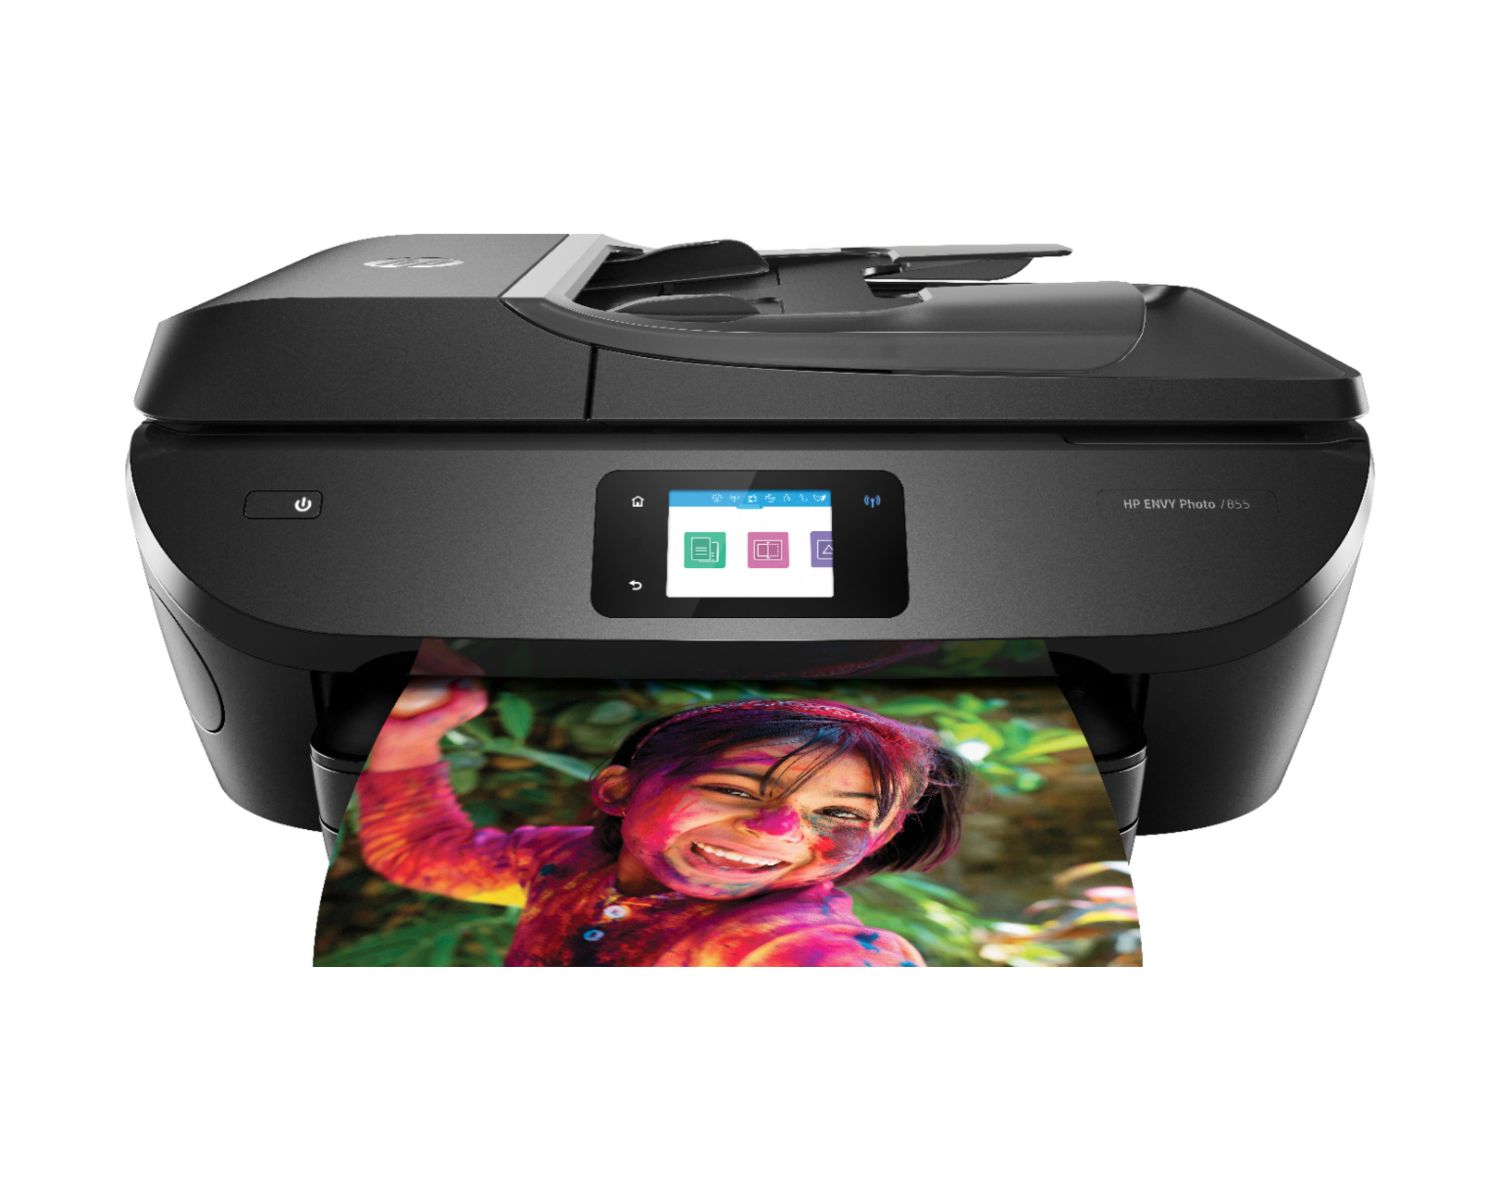 How Do I Connect My HP Envy Printer To Wi-Fi